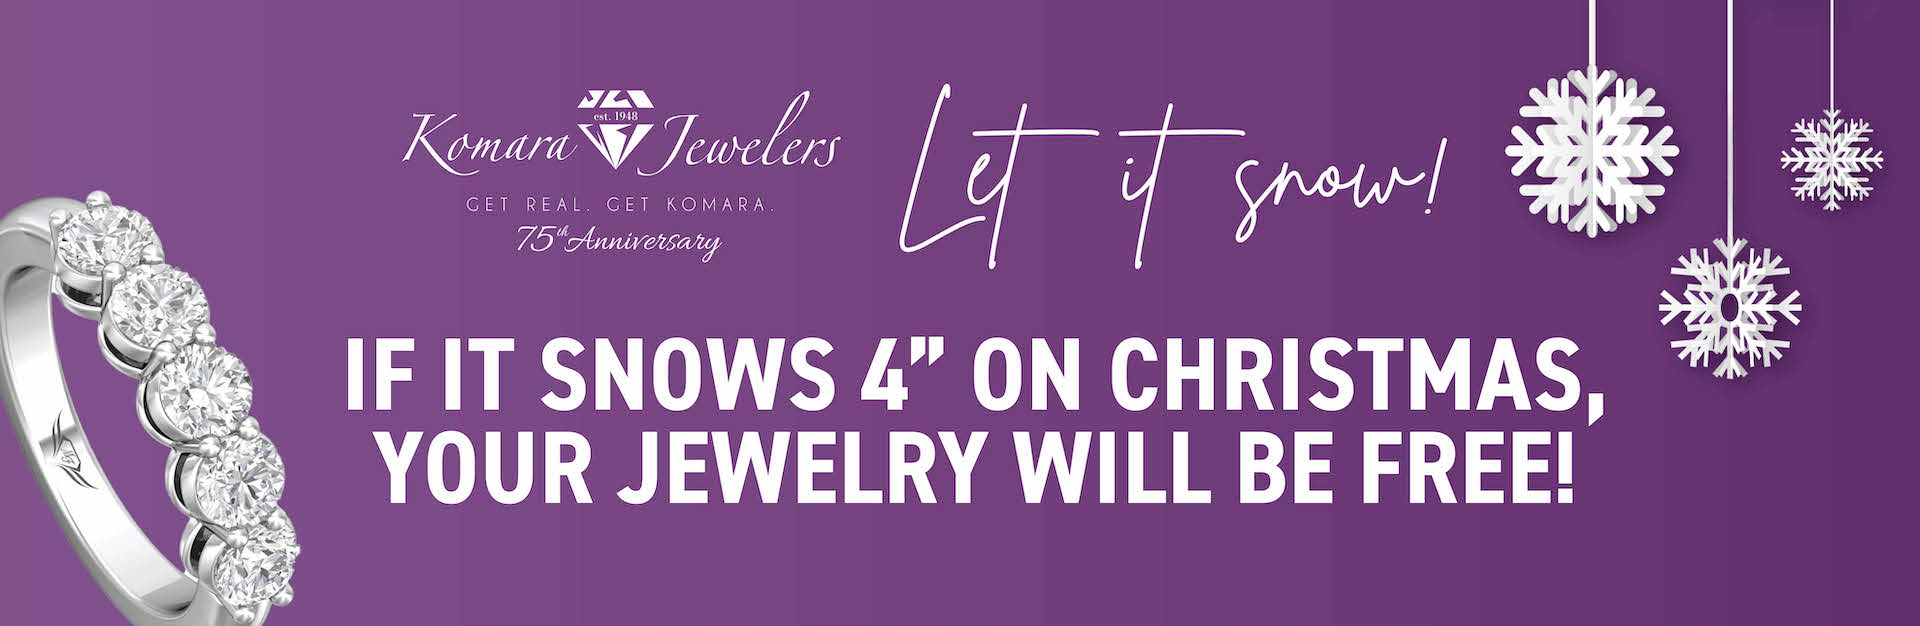 Your jewelry purchases from December 5th-December 17th could be free.